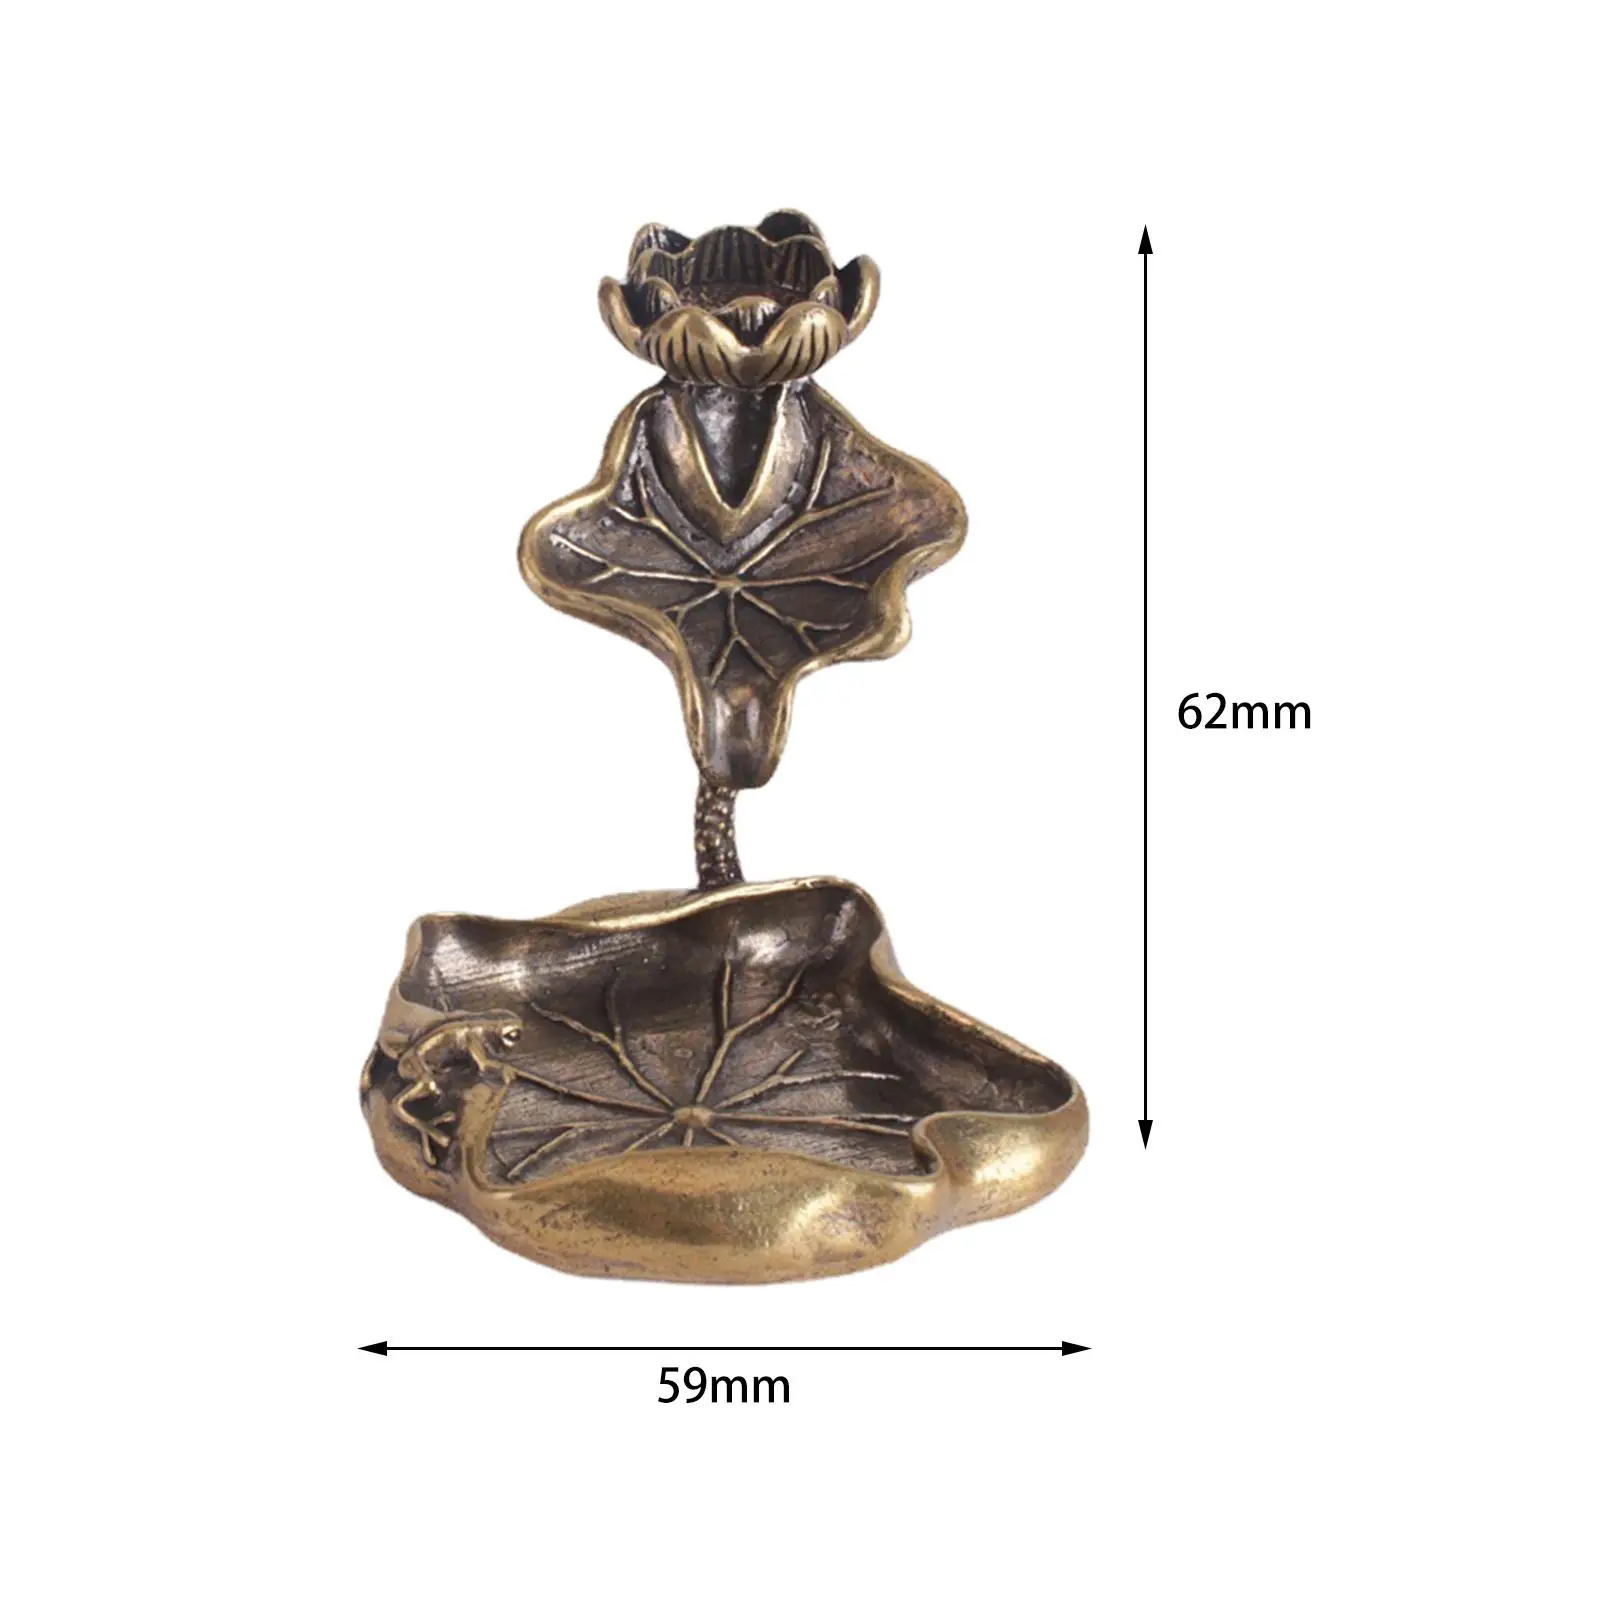 Backflow Incense Burner Backflow Cone Incense Holder Lotus Leaf Tray Figurine Centerpieces Waterfall for Yoga Teahouse Desk Gift